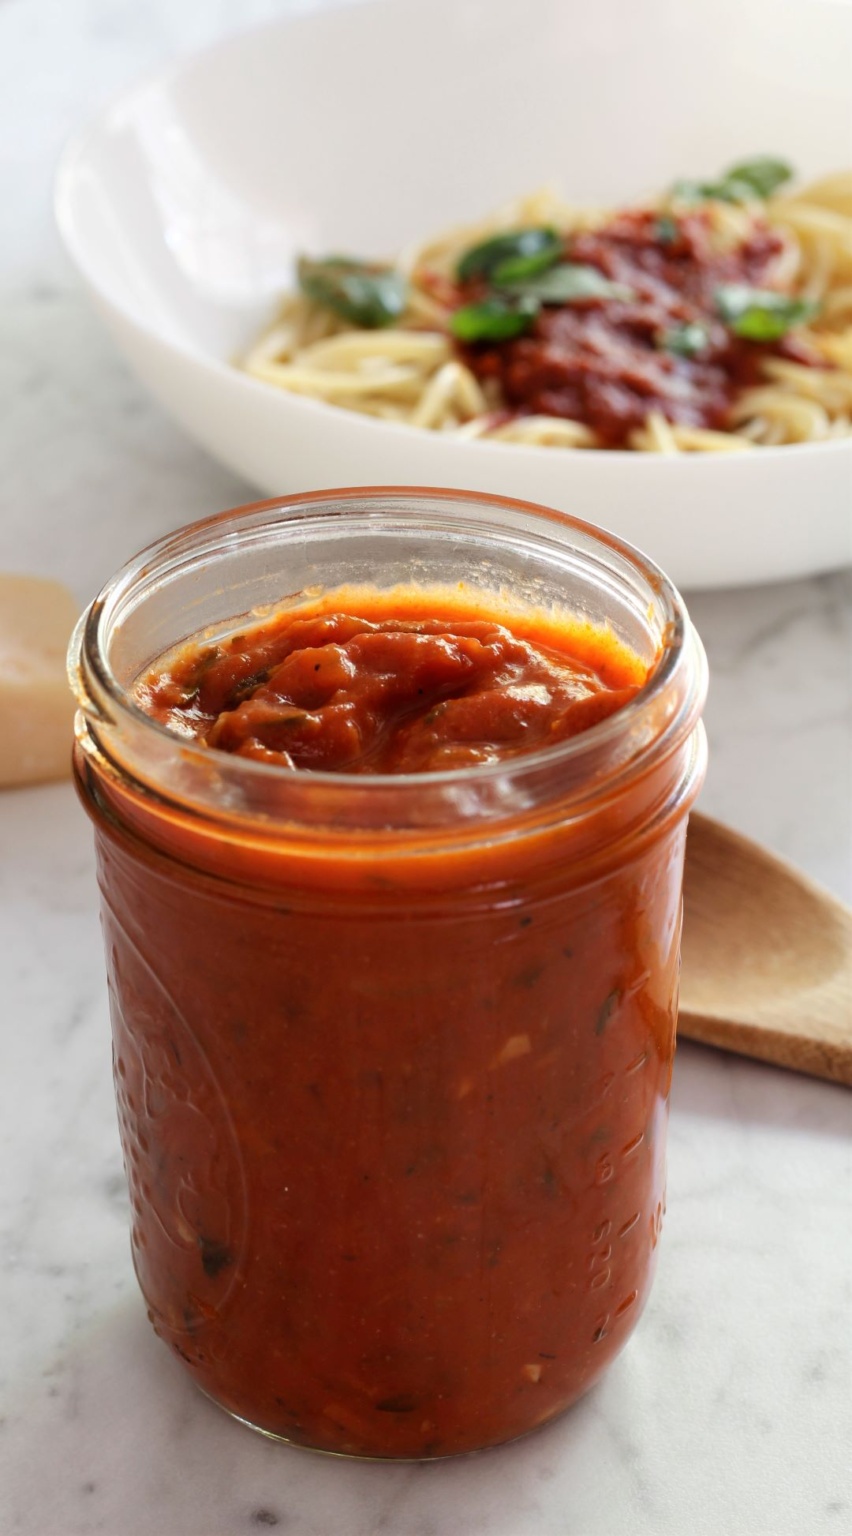 Homemade Spaghetti Sauce From Scratch | More Recipes